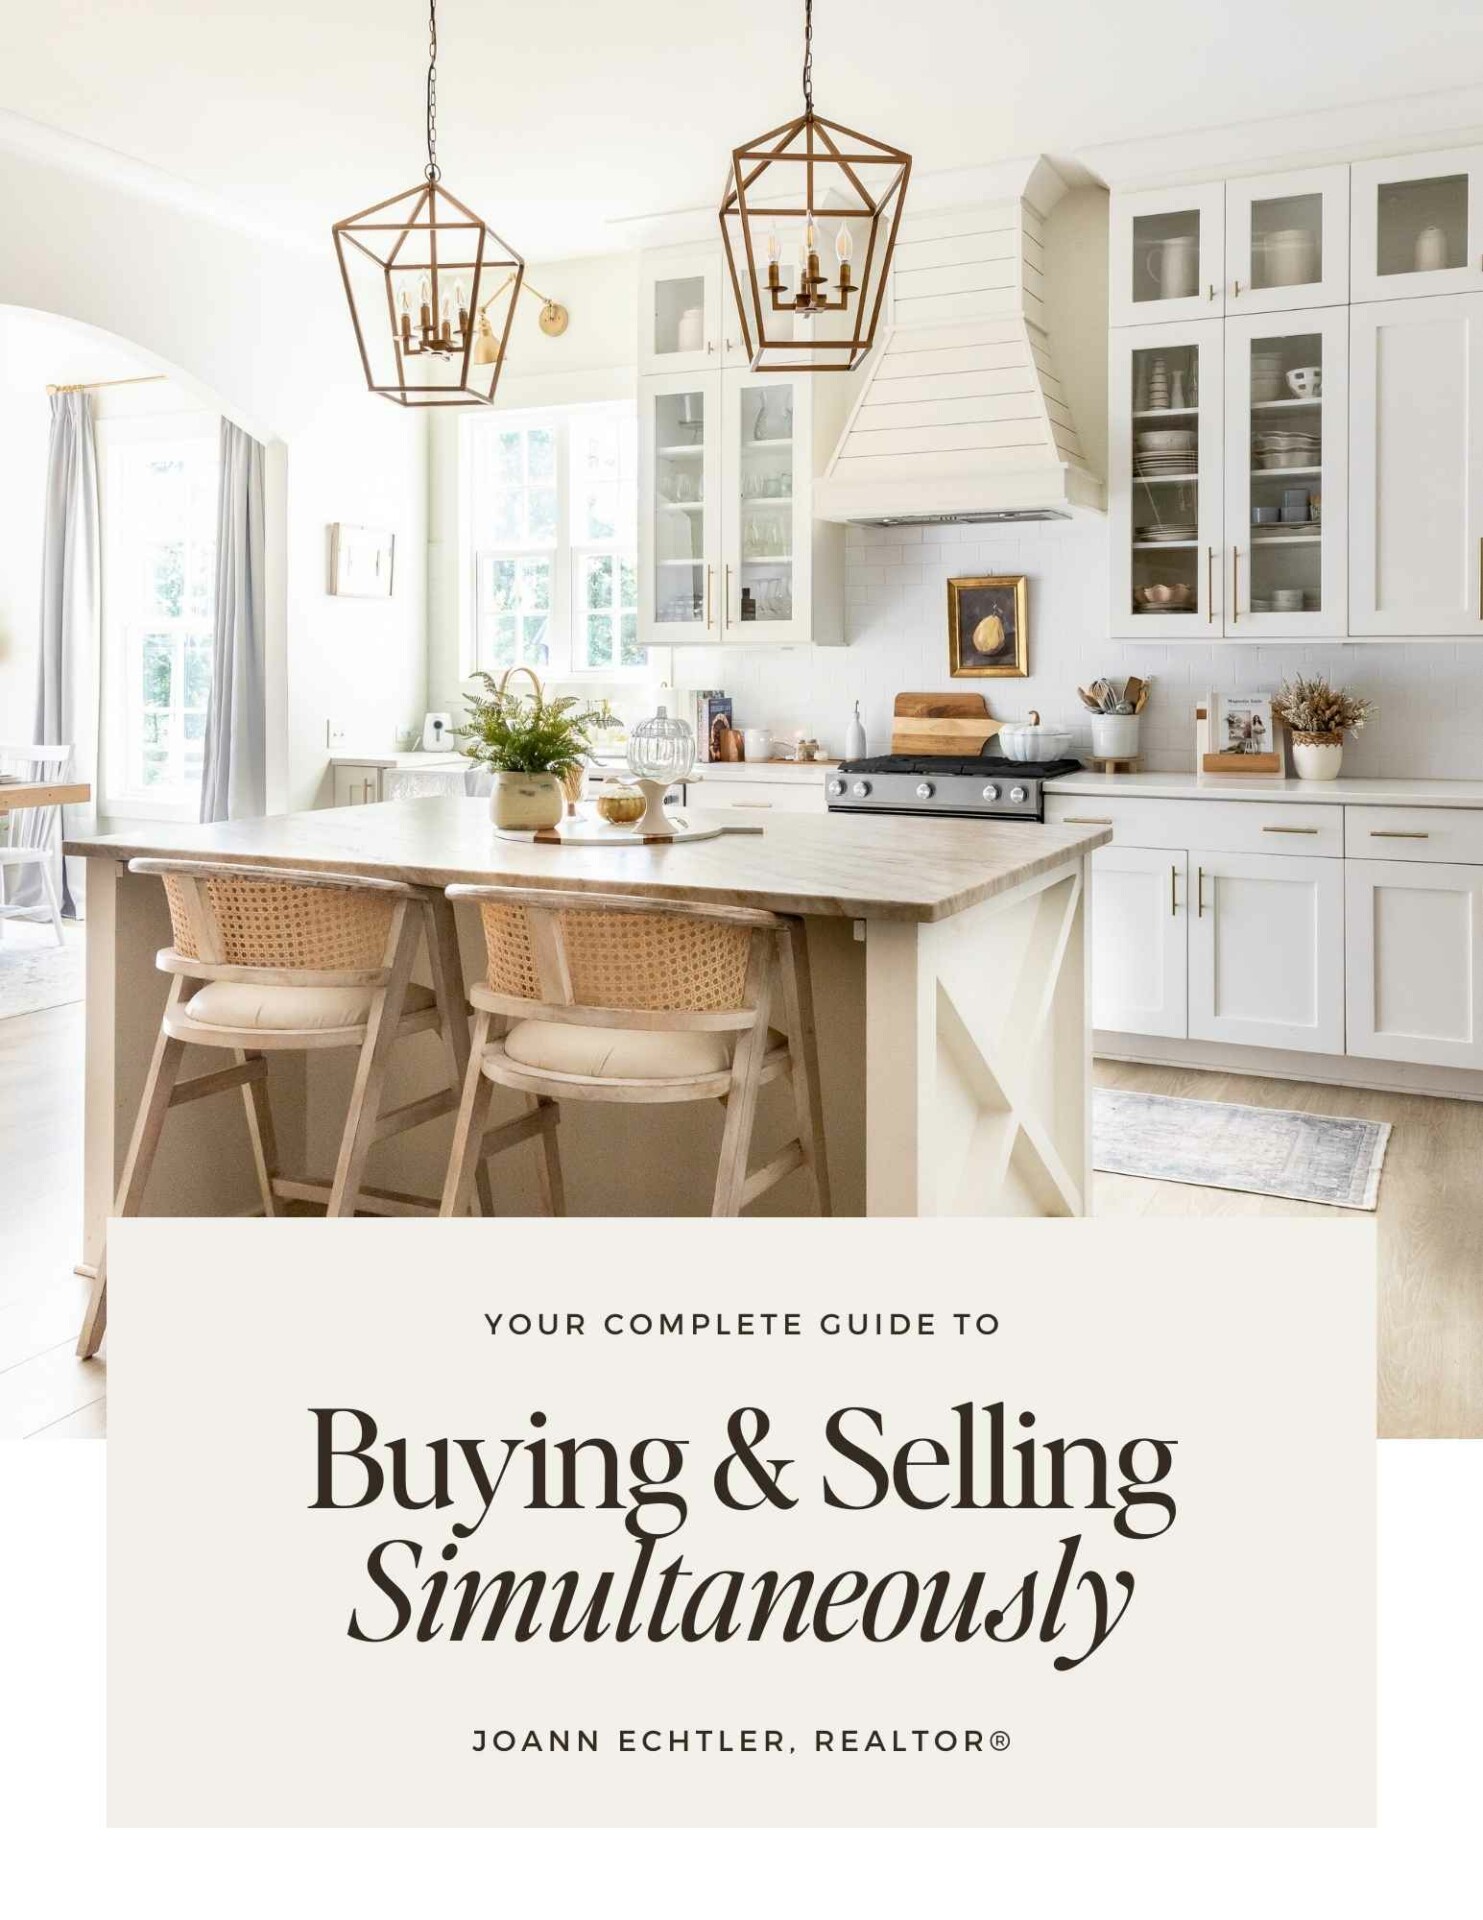 Buying and Selling Simultaneously Guide